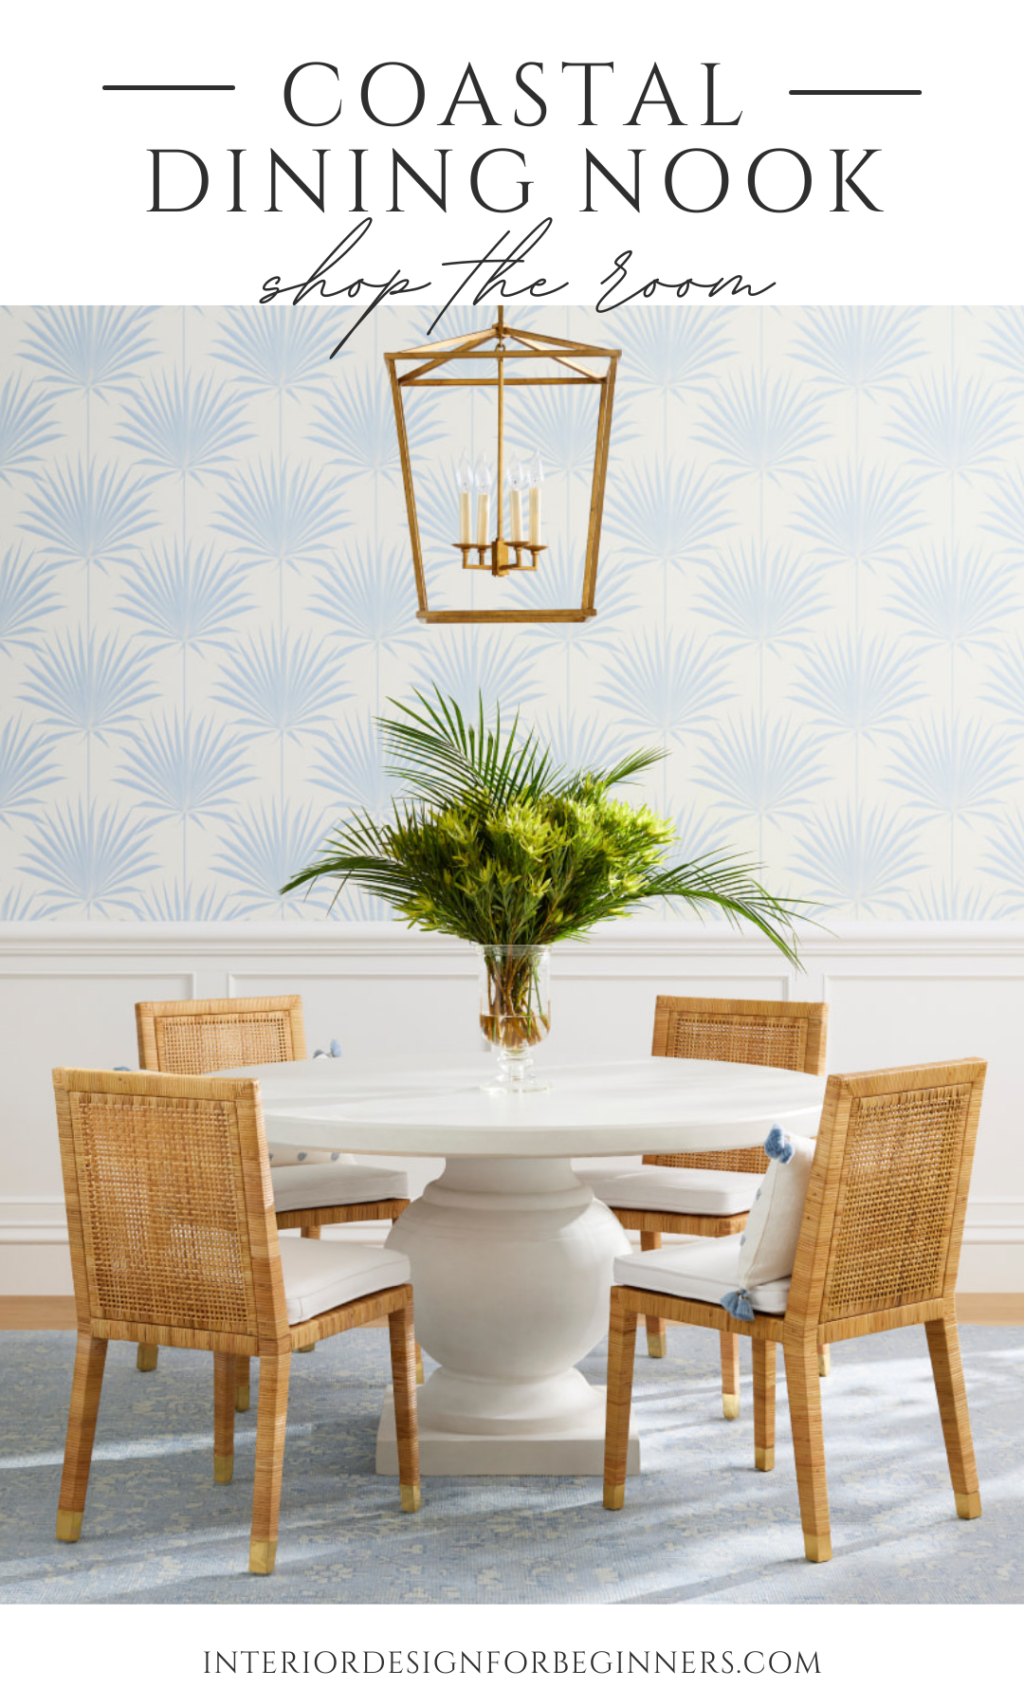 modern coastal dining room breakfast nook ideas and inspiration shop the room and look